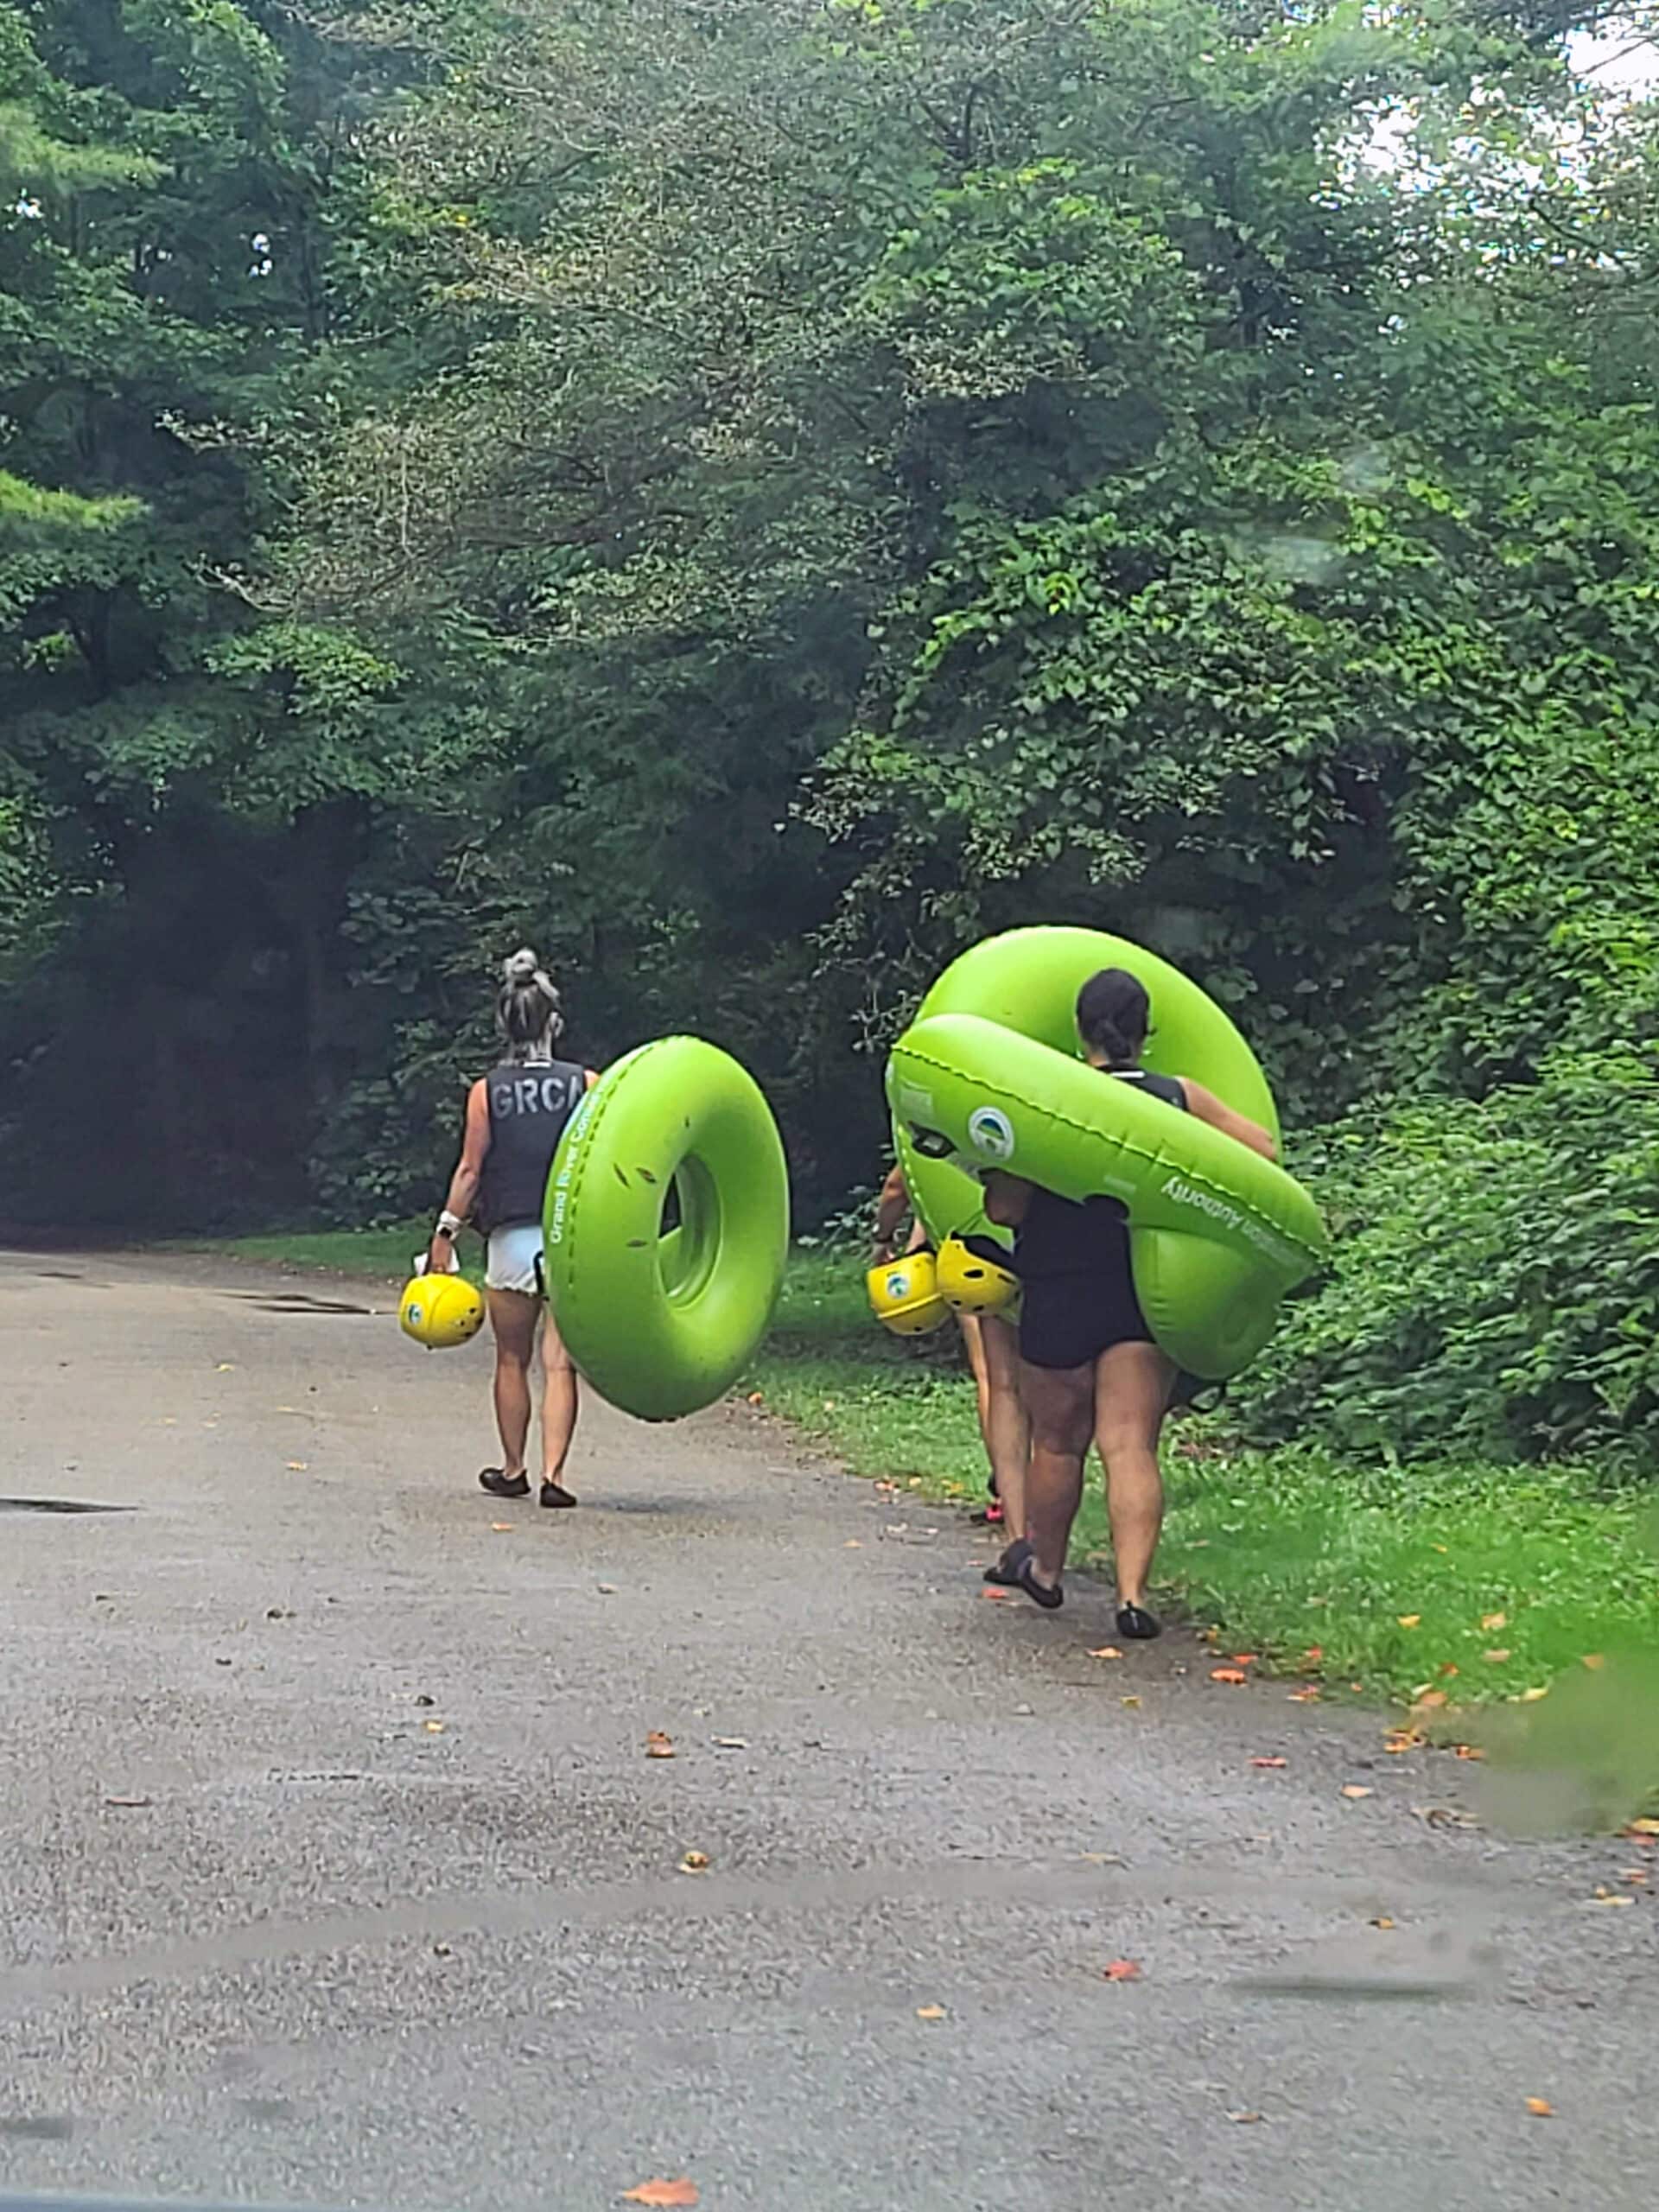 Several people carrying bright green inner tubes, walking away from the photographer.